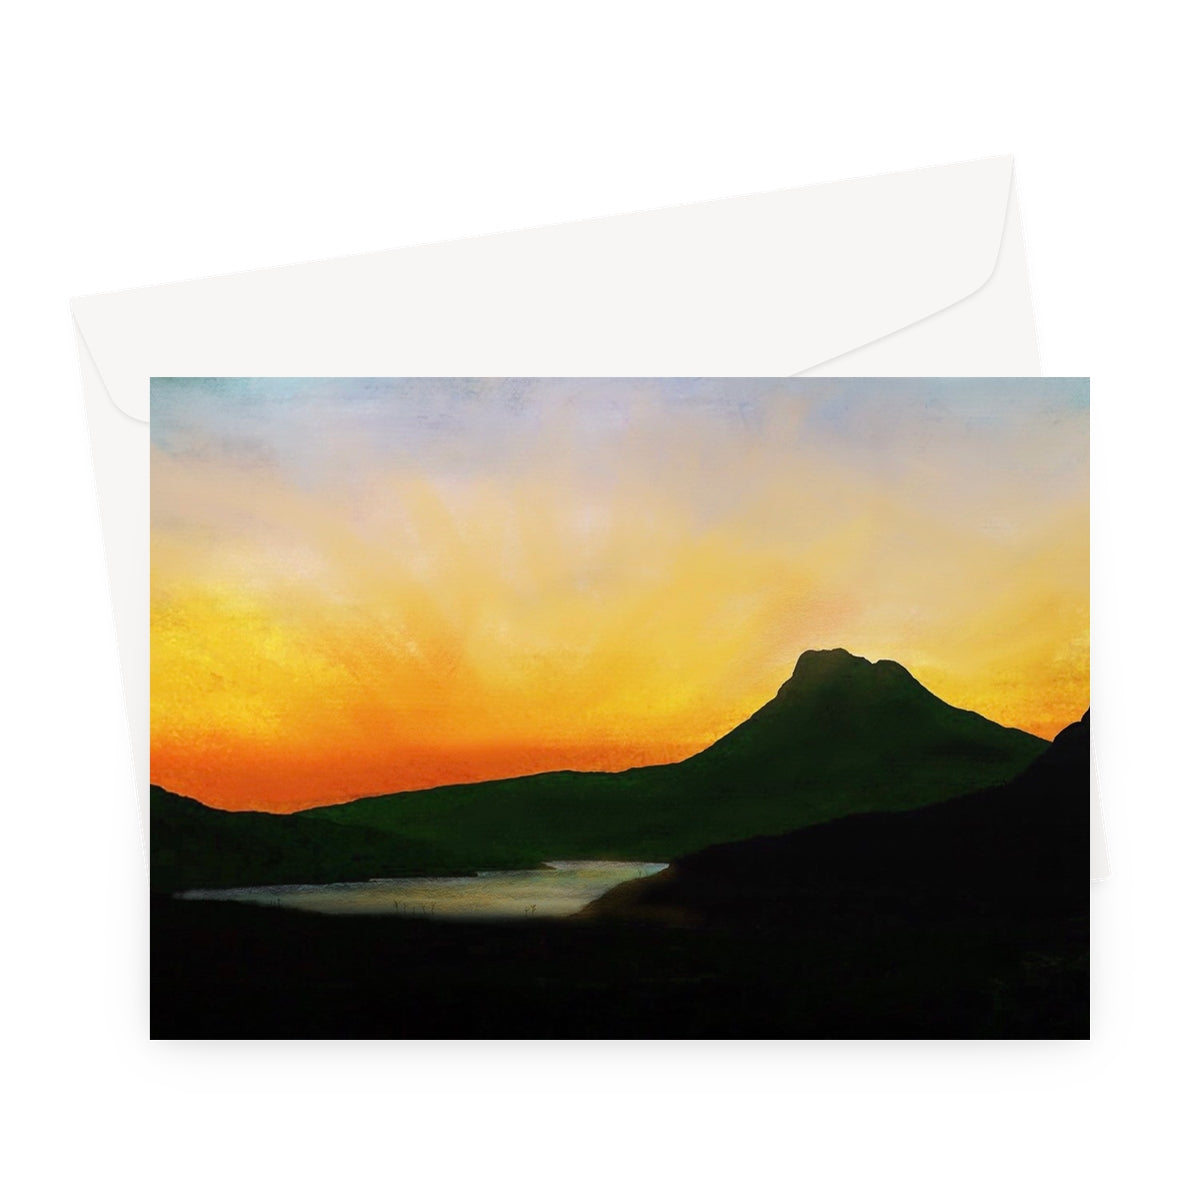 Stac Pollaidh Dusk Art Gifts Greeting Card-Greetings Cards-Scottish Lochs & Mountains Art Gallery-A5 Landscape-1 Card-Paintings, Prints, Homeware, Art Gifts From Scotland By Scottish Artist Kevin Hunter